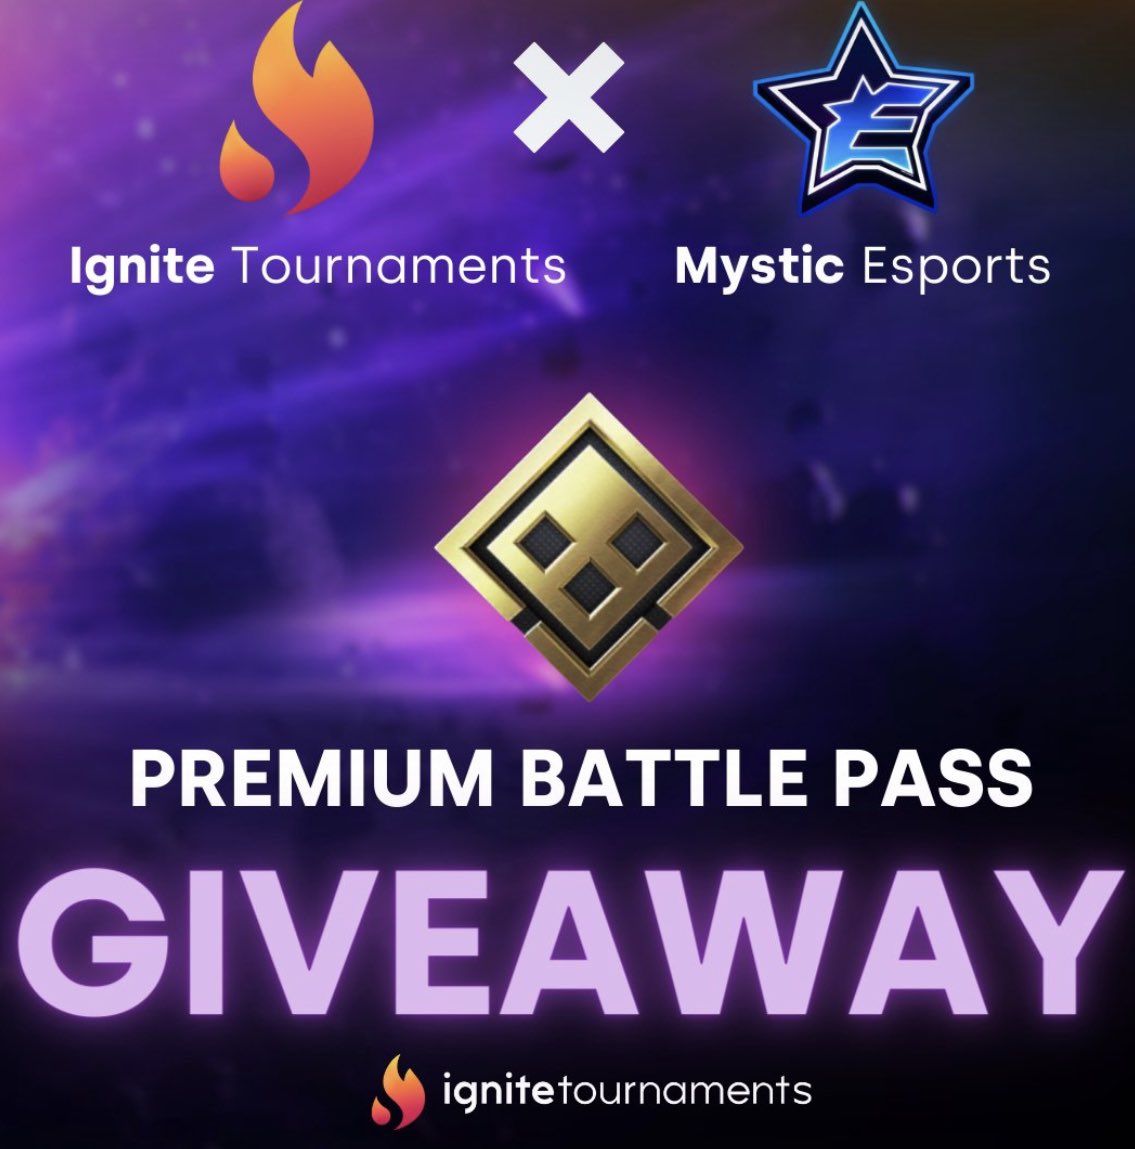 🚀 #FortniteOG Battle Pass & #CODM Premium Battle Pass Giveaway! 🚀 (2 Winners) To Enter: - Follow @igniteyourgames & @MysticEsportsOP - Like & Retweet Winners will be announced in 7 days! Good Luck! 🍀 #MysticNation | #StayMystic